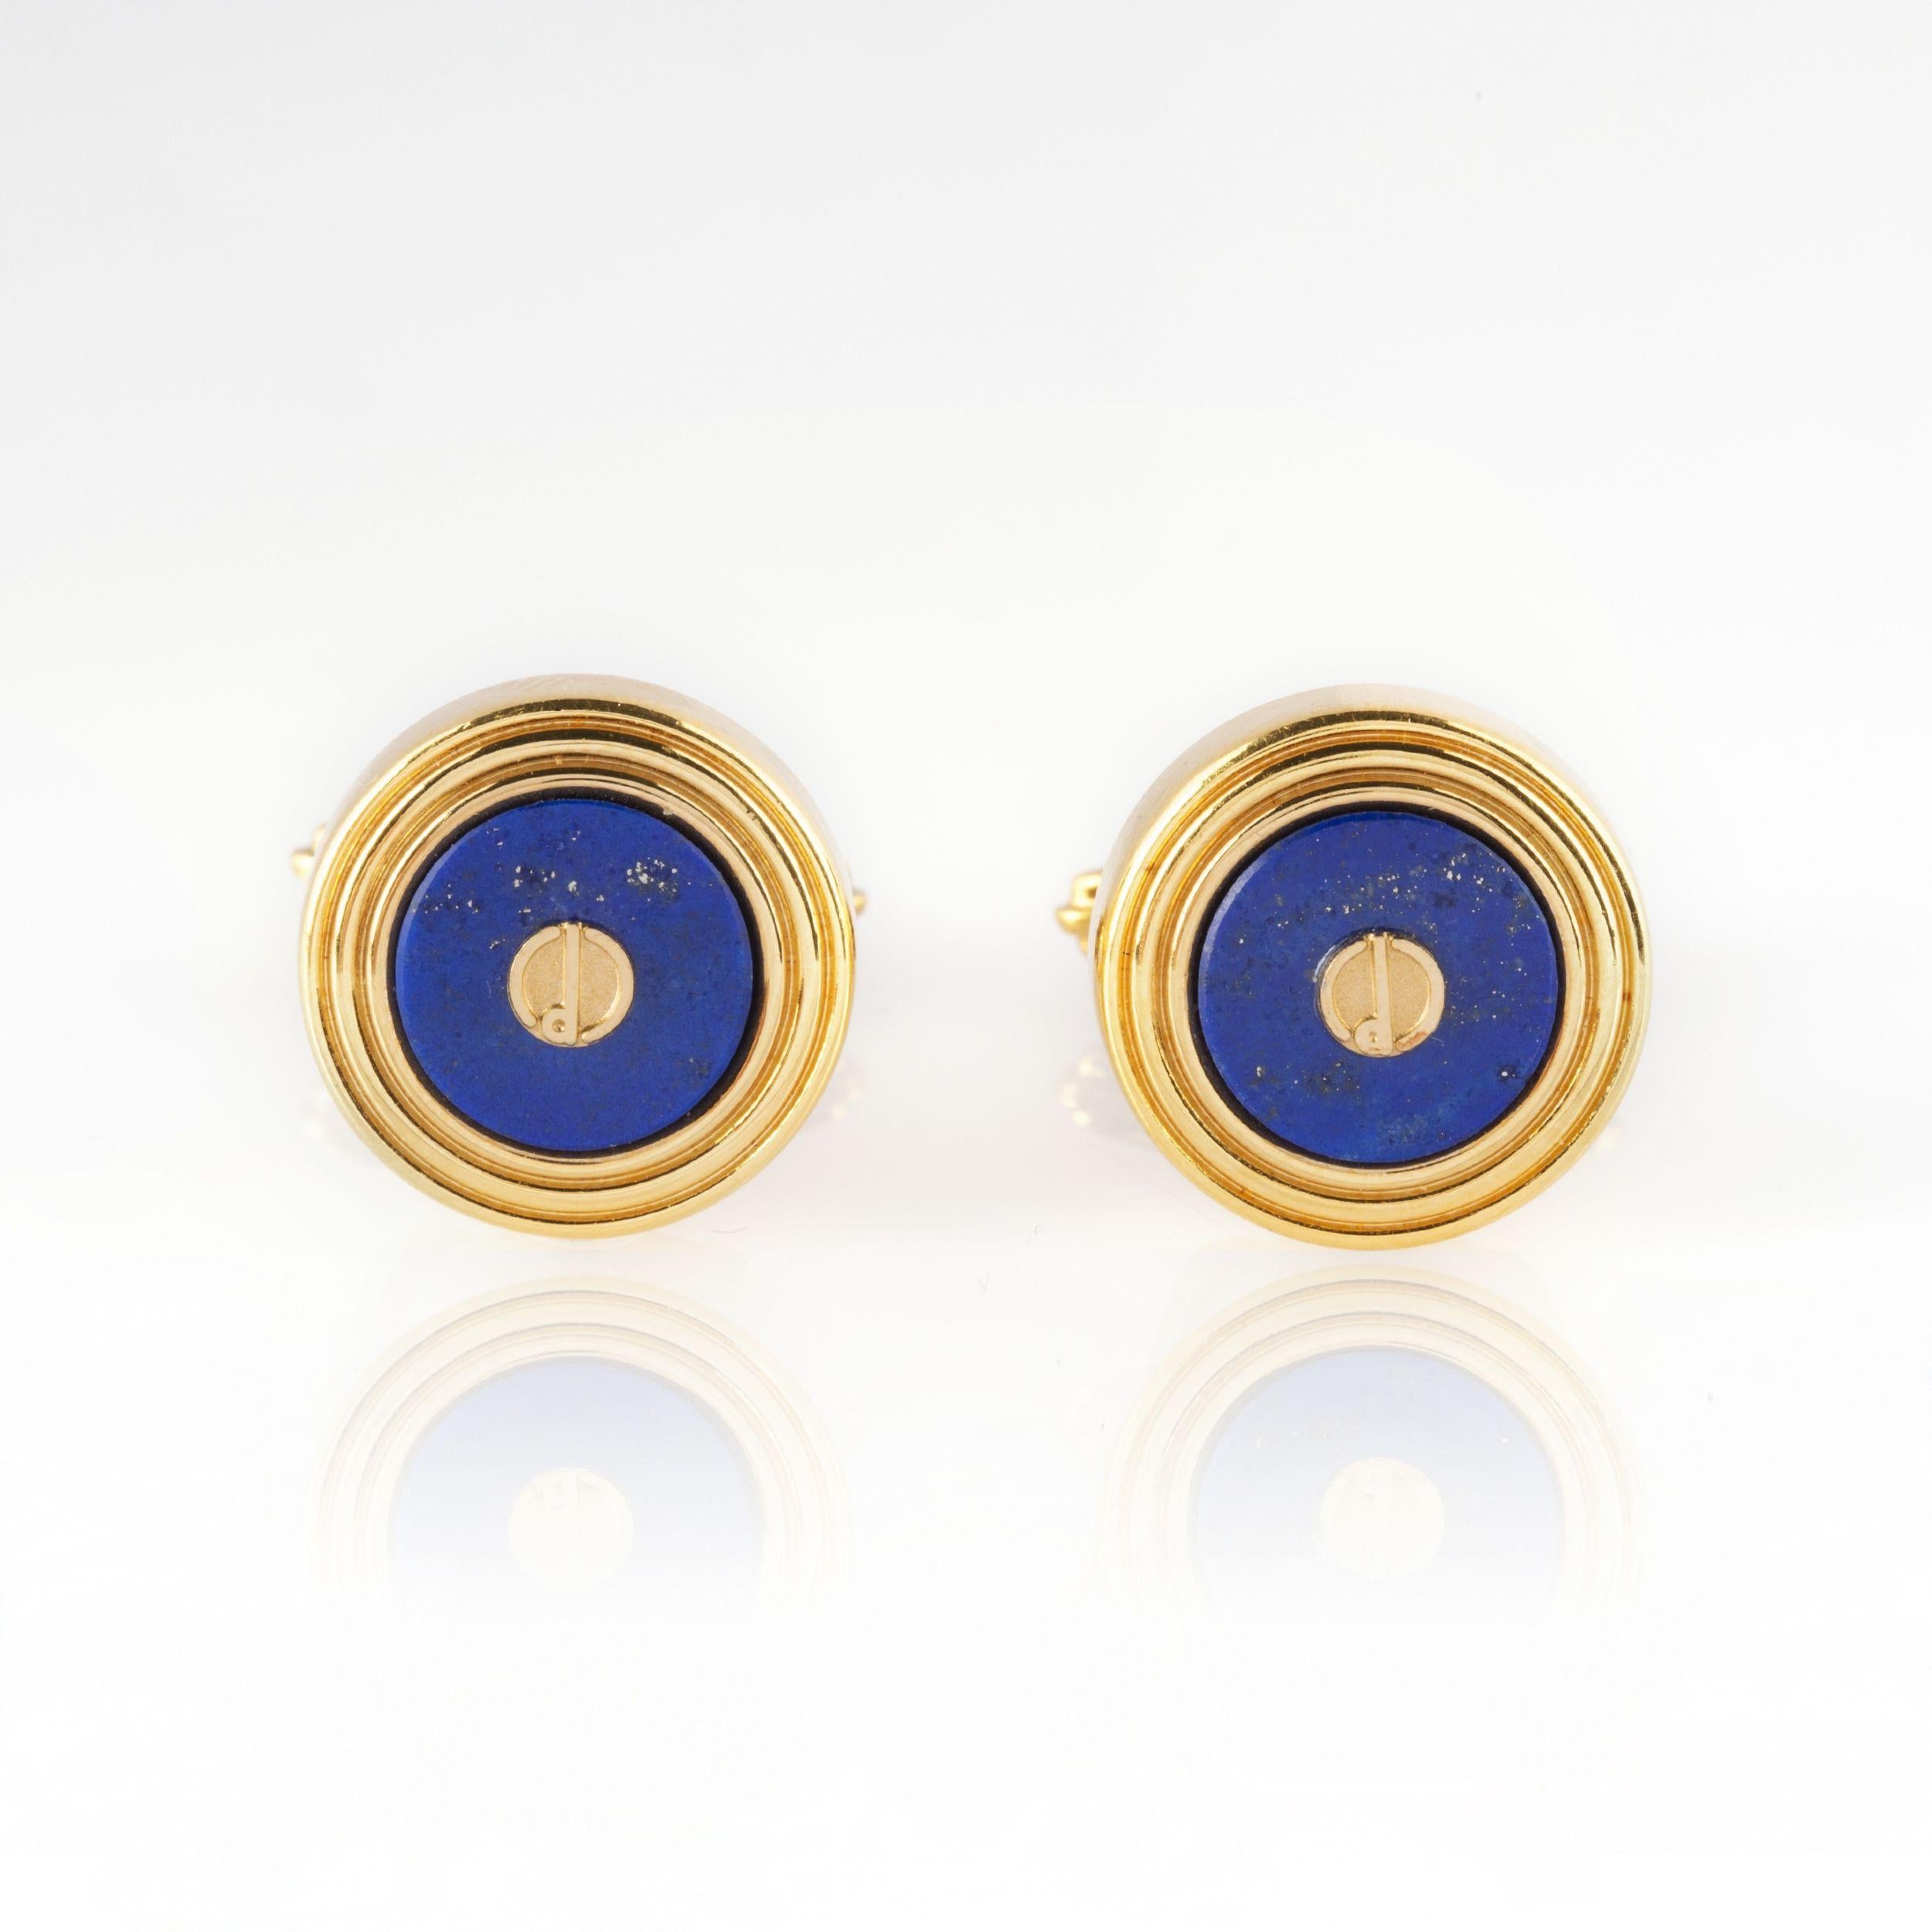 Classical and chic Dunhill cufflinks, gold plated and Lapis lazuli. You can choose either a circle, gold tone written 